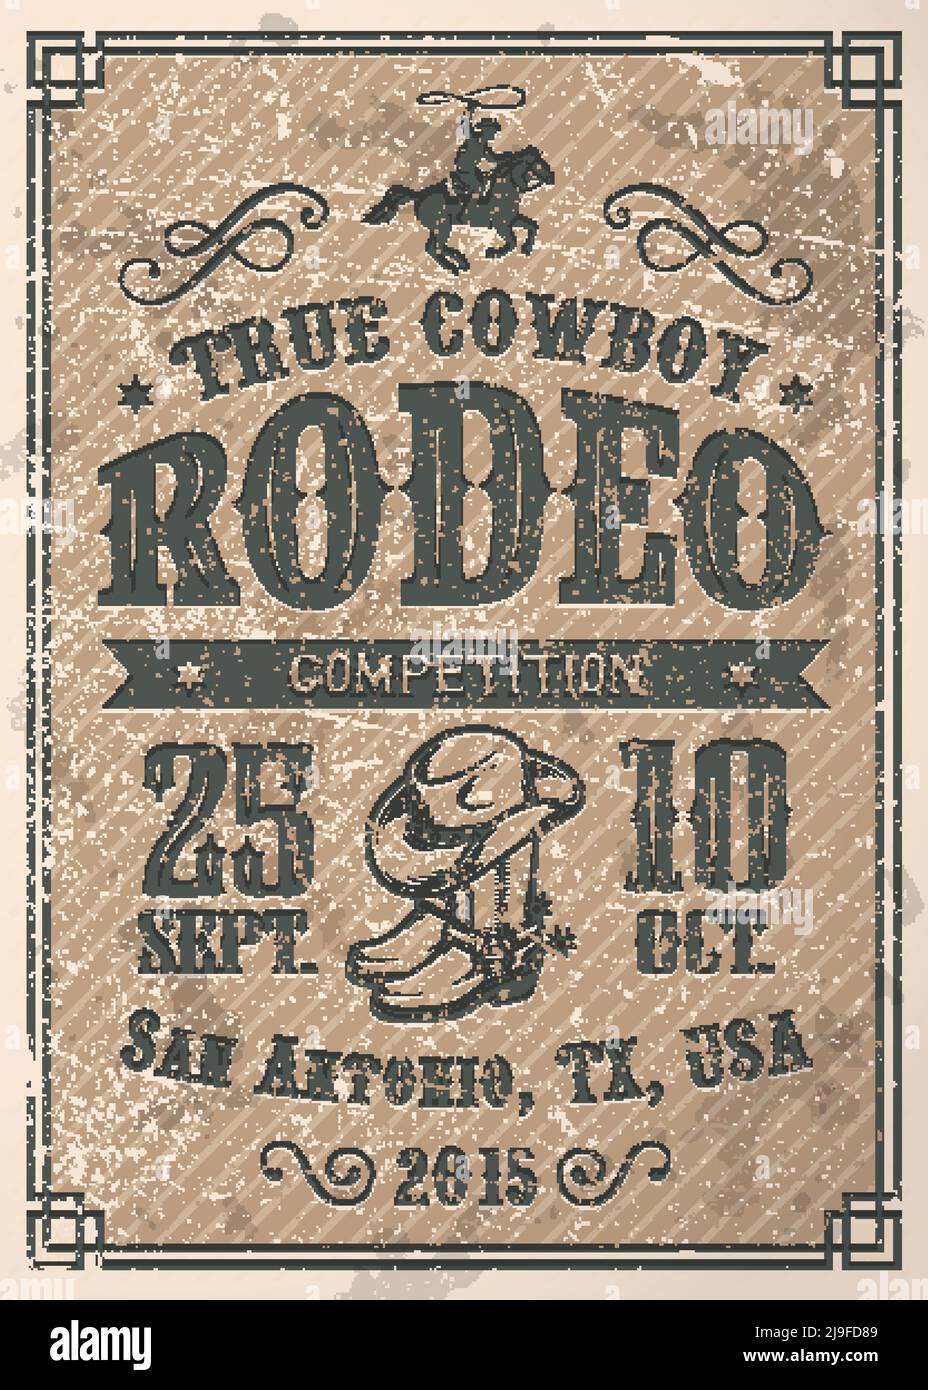 American cowboy rodeo poster with typography and vintage paper texture Stock Vector